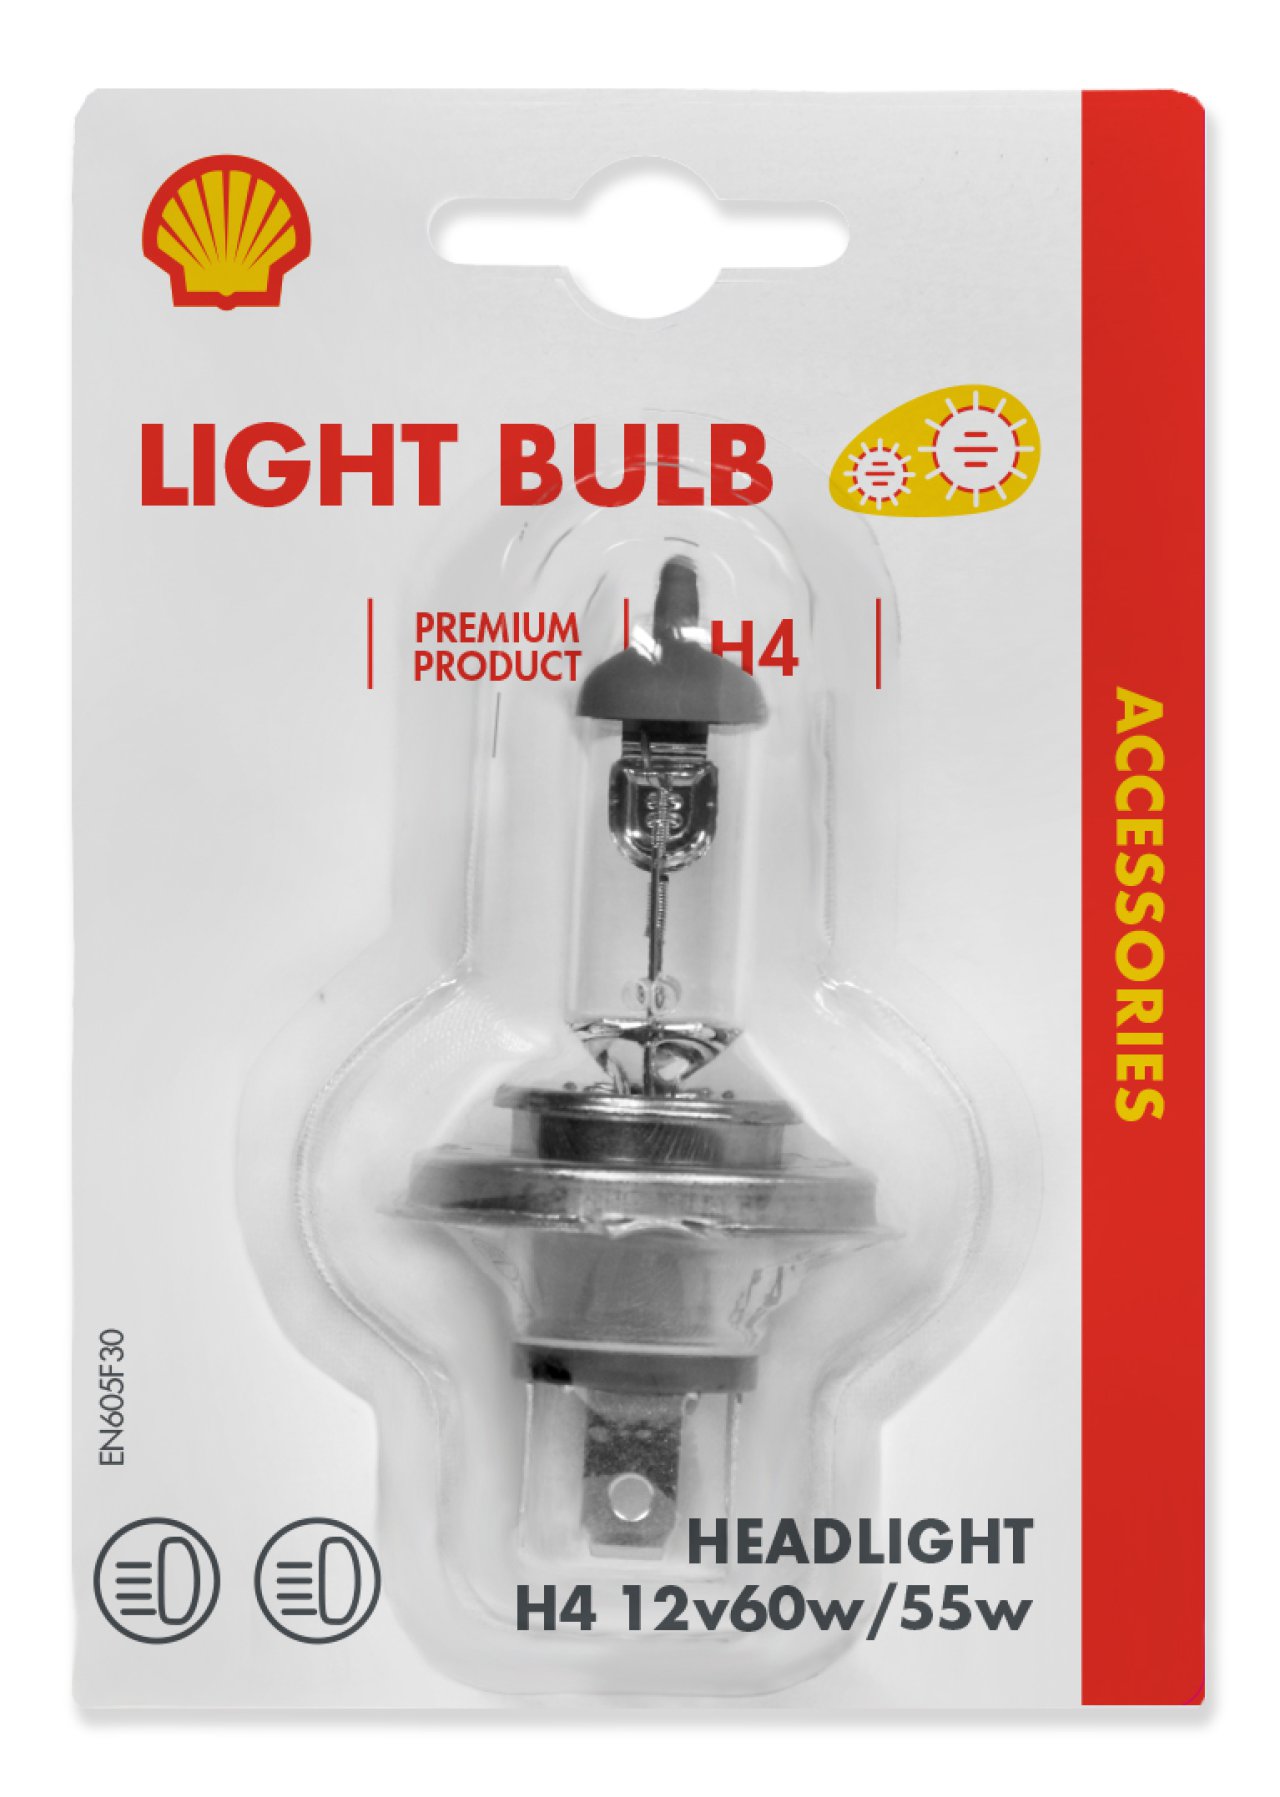 https://shellcarcareproducts.com/images/products/h4-light-bulb-shell-12v-60-55w.jpg?resolution=1280x0&quality=85&type=webp&background=FFFFFFFF